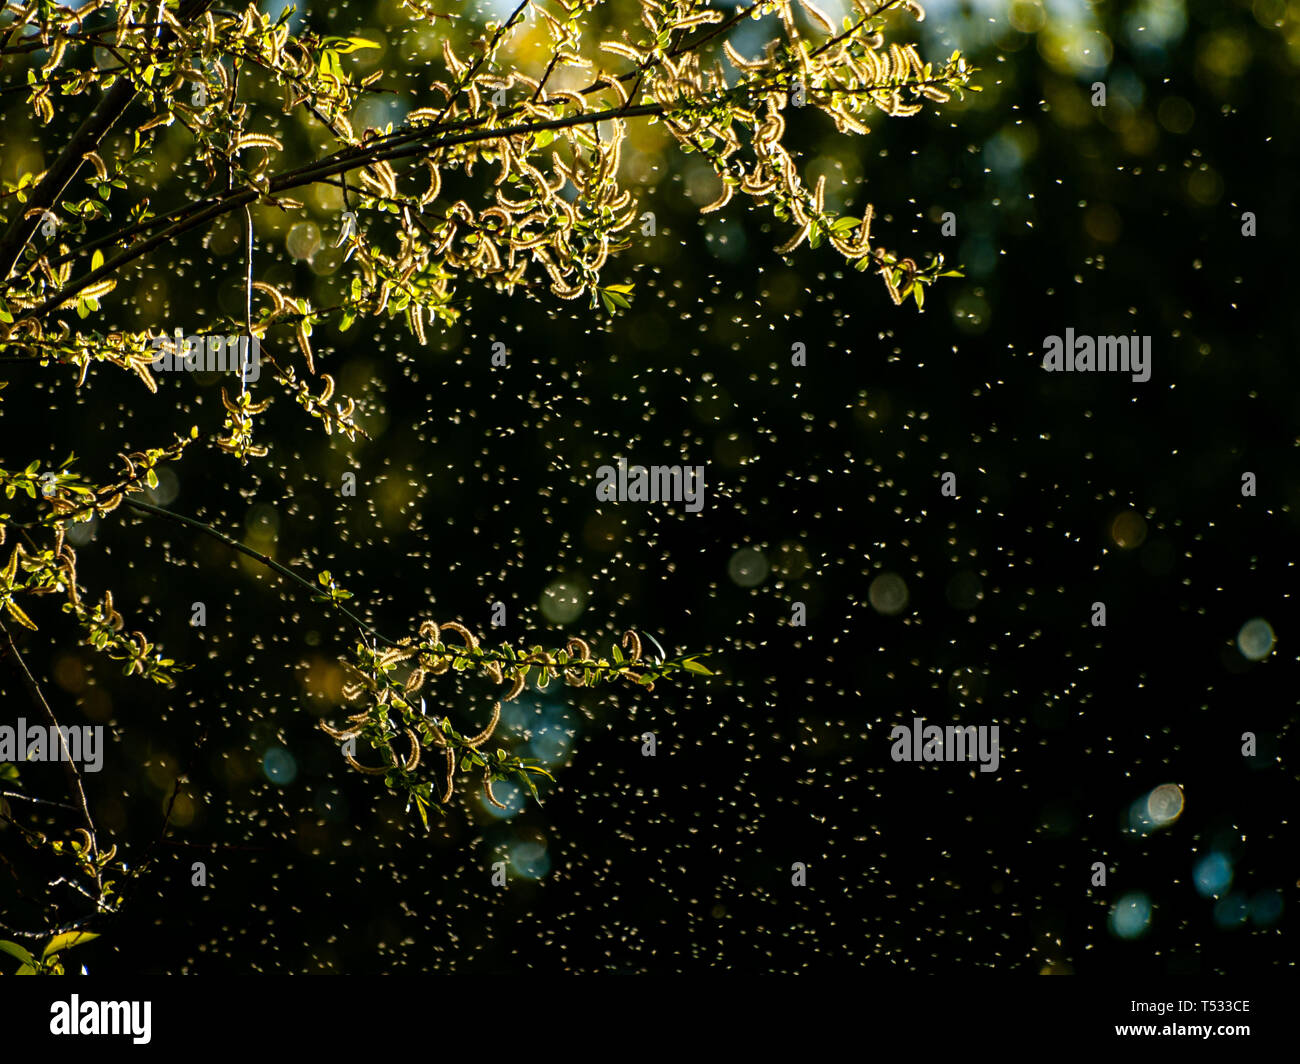 A cloud of mosquitoes in the forest on a bokeh background Stock Photo